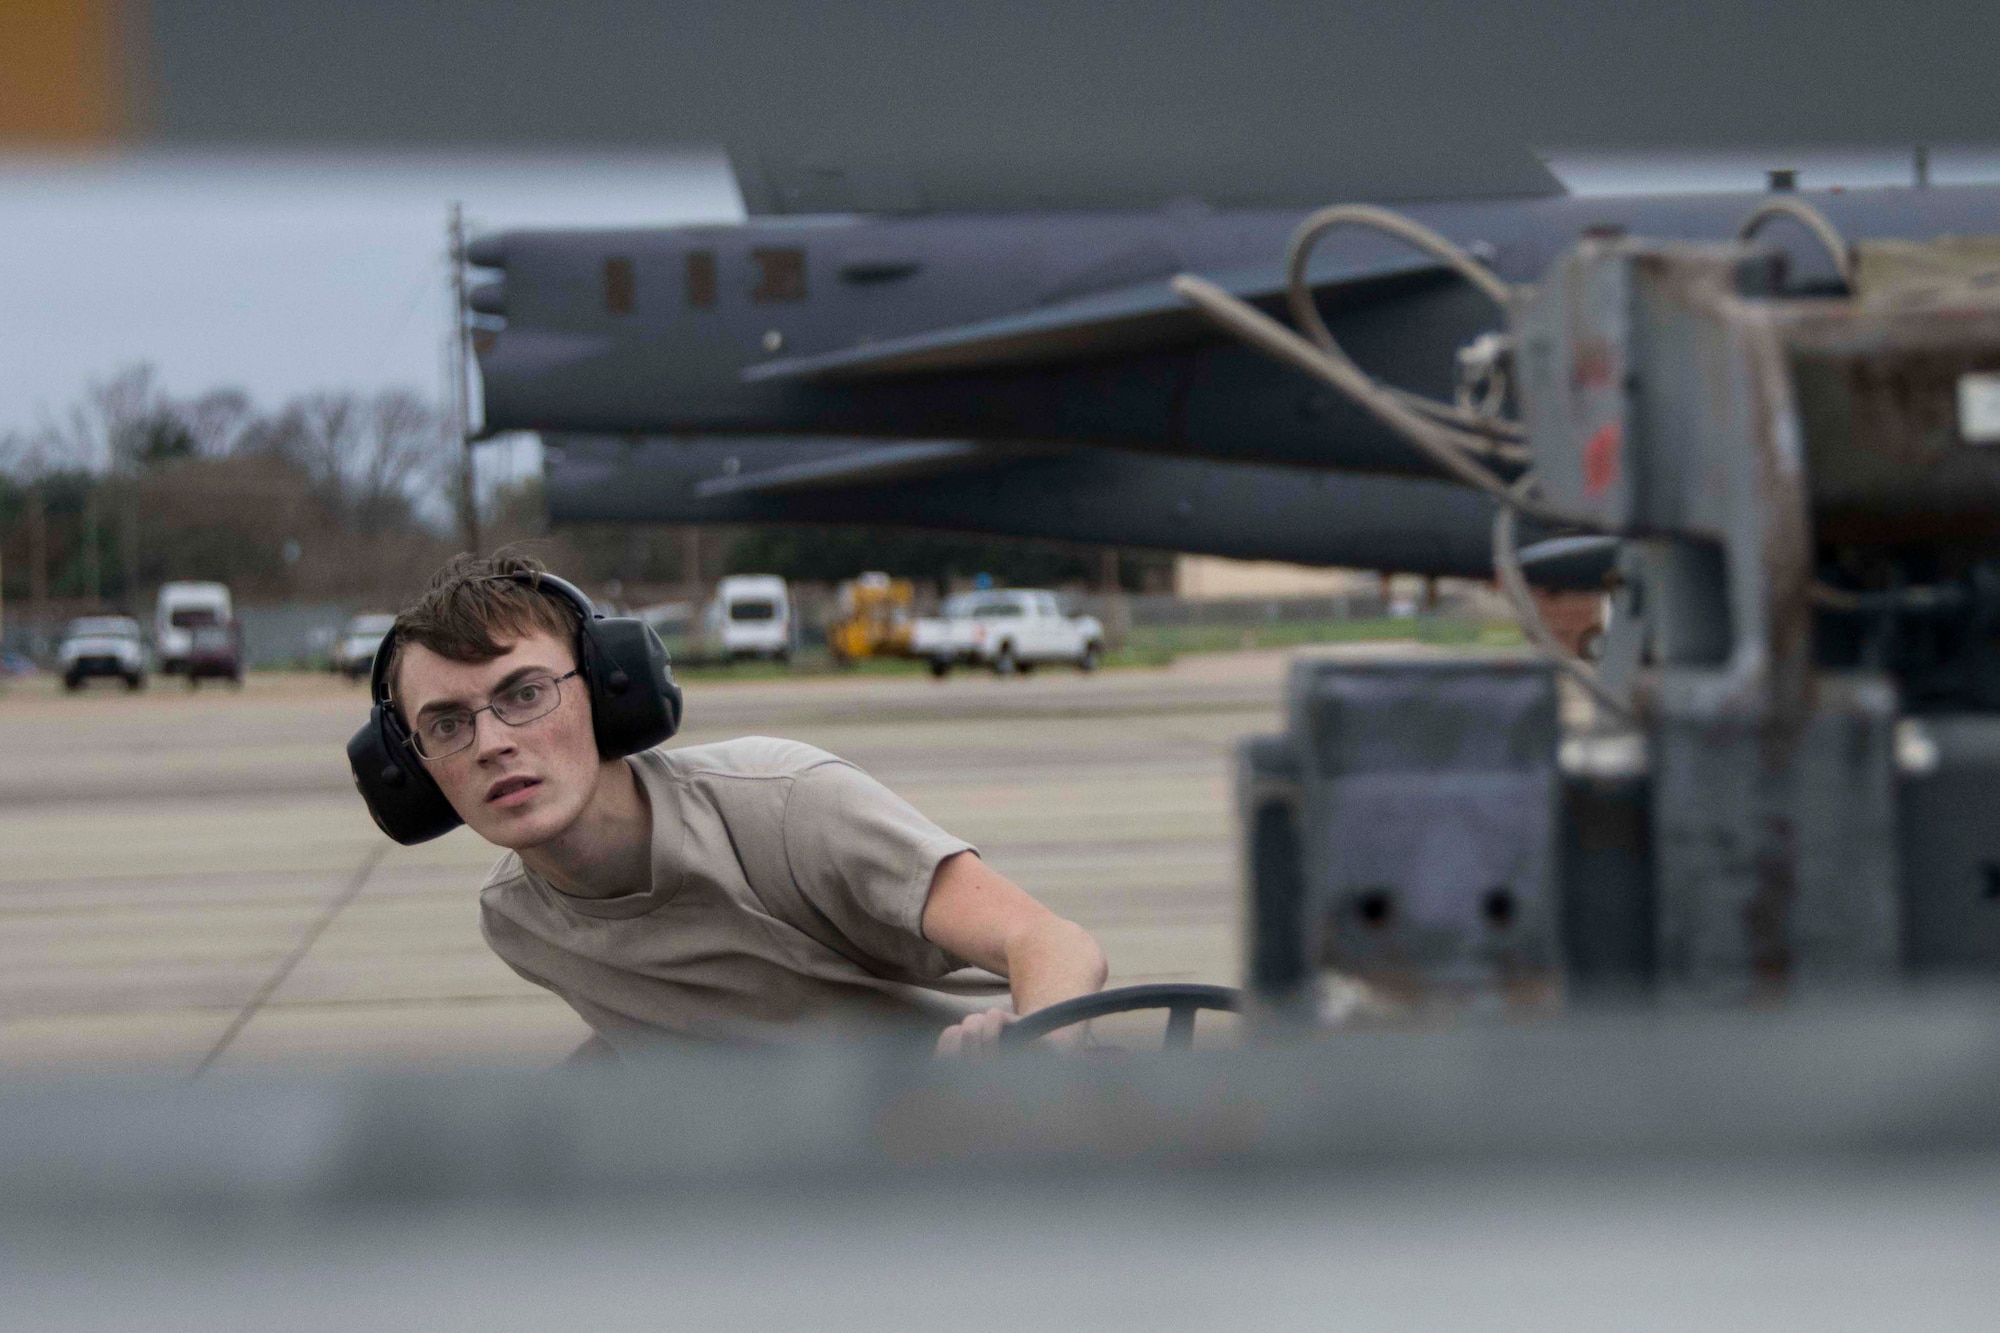 U.S. Air Force Airman 1st Class Japheth Wyatt, 2nd Aircraft Maintenance Squadron weapons loader, guides an AGM-158 Joint Air-to-Surface Standoff Missile onto a B-52 Stratofortress at Barksdale Air Force Base, Louisiana, Feb. 6, 2019.  The JASSM’s were placed on a Conventional Rotary Launcher to test its ability to provide power to eight munitions at once.  (U.S. Air Force photo by Master Sgt. Ted Daigle)